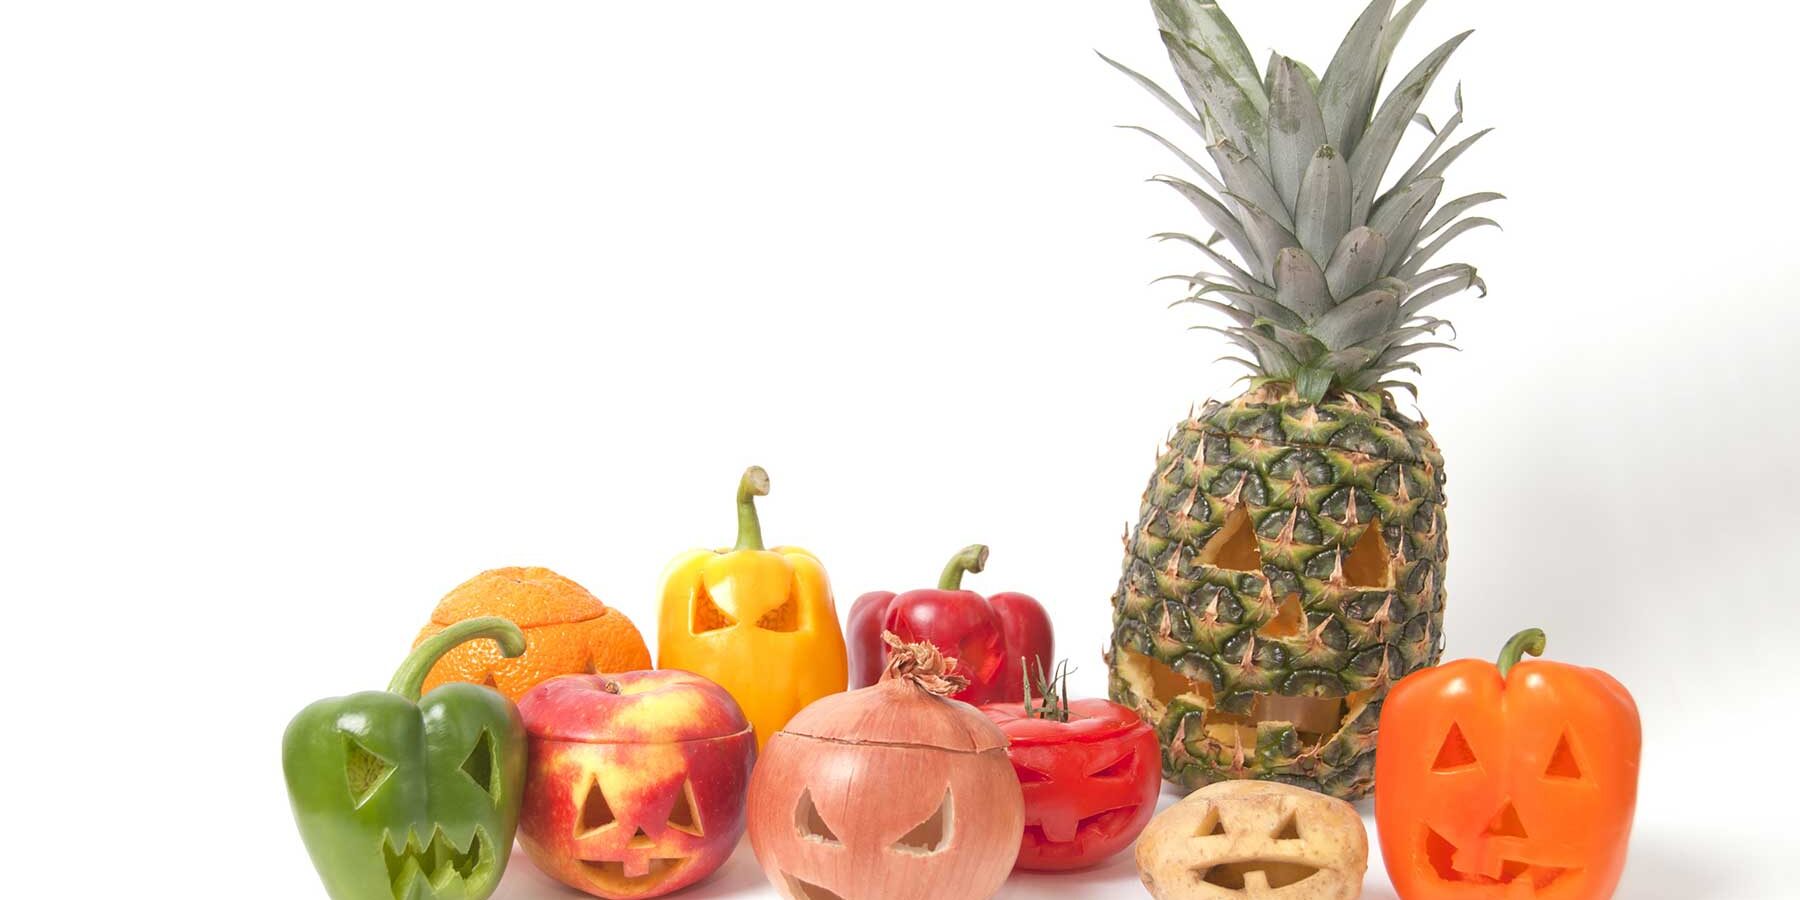 9-things-you-can-carve-for-halloween-that-arent-pumpkins